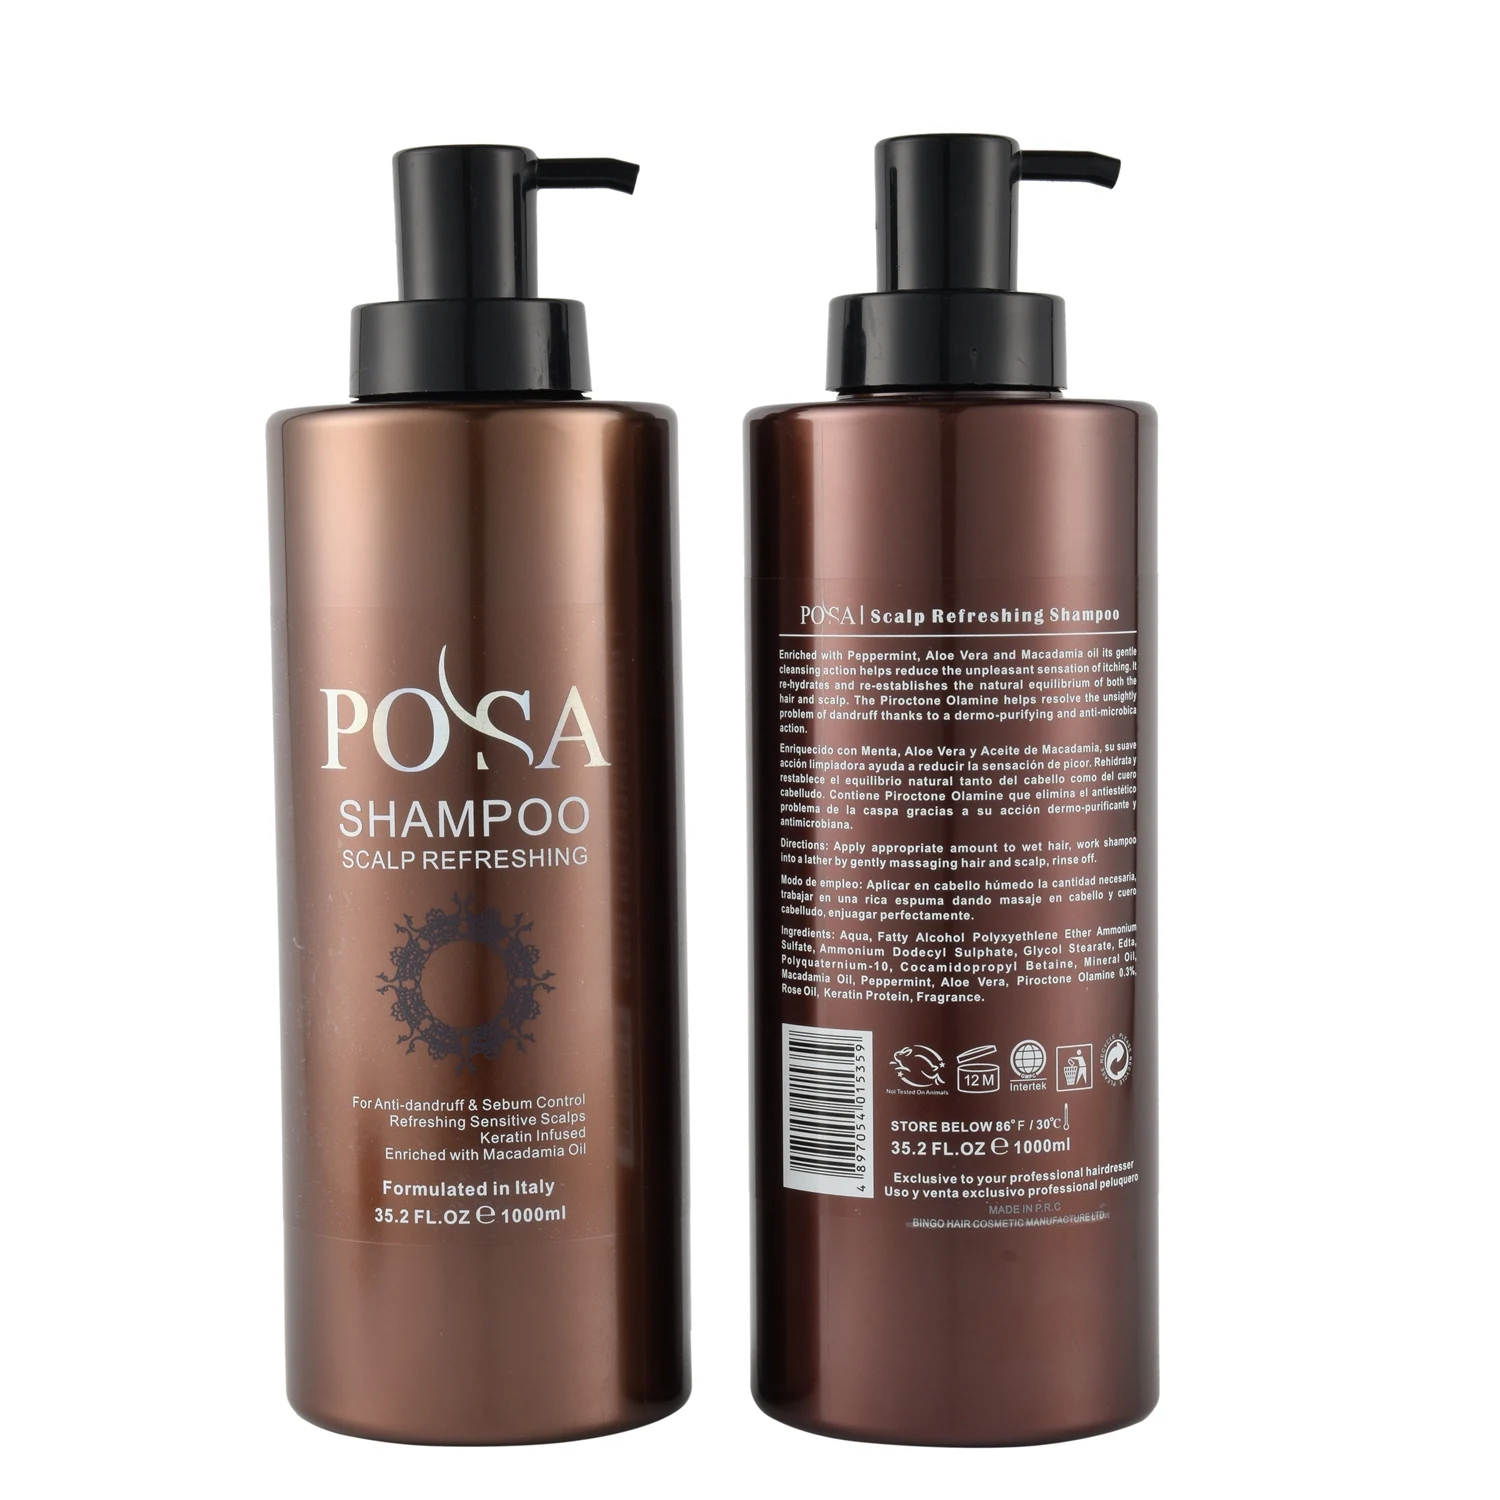 

POSA Organic Tea Tree Oil And Mint Lice Shampoo Cleansing And Anti Itching Shampoo For All Hair Types